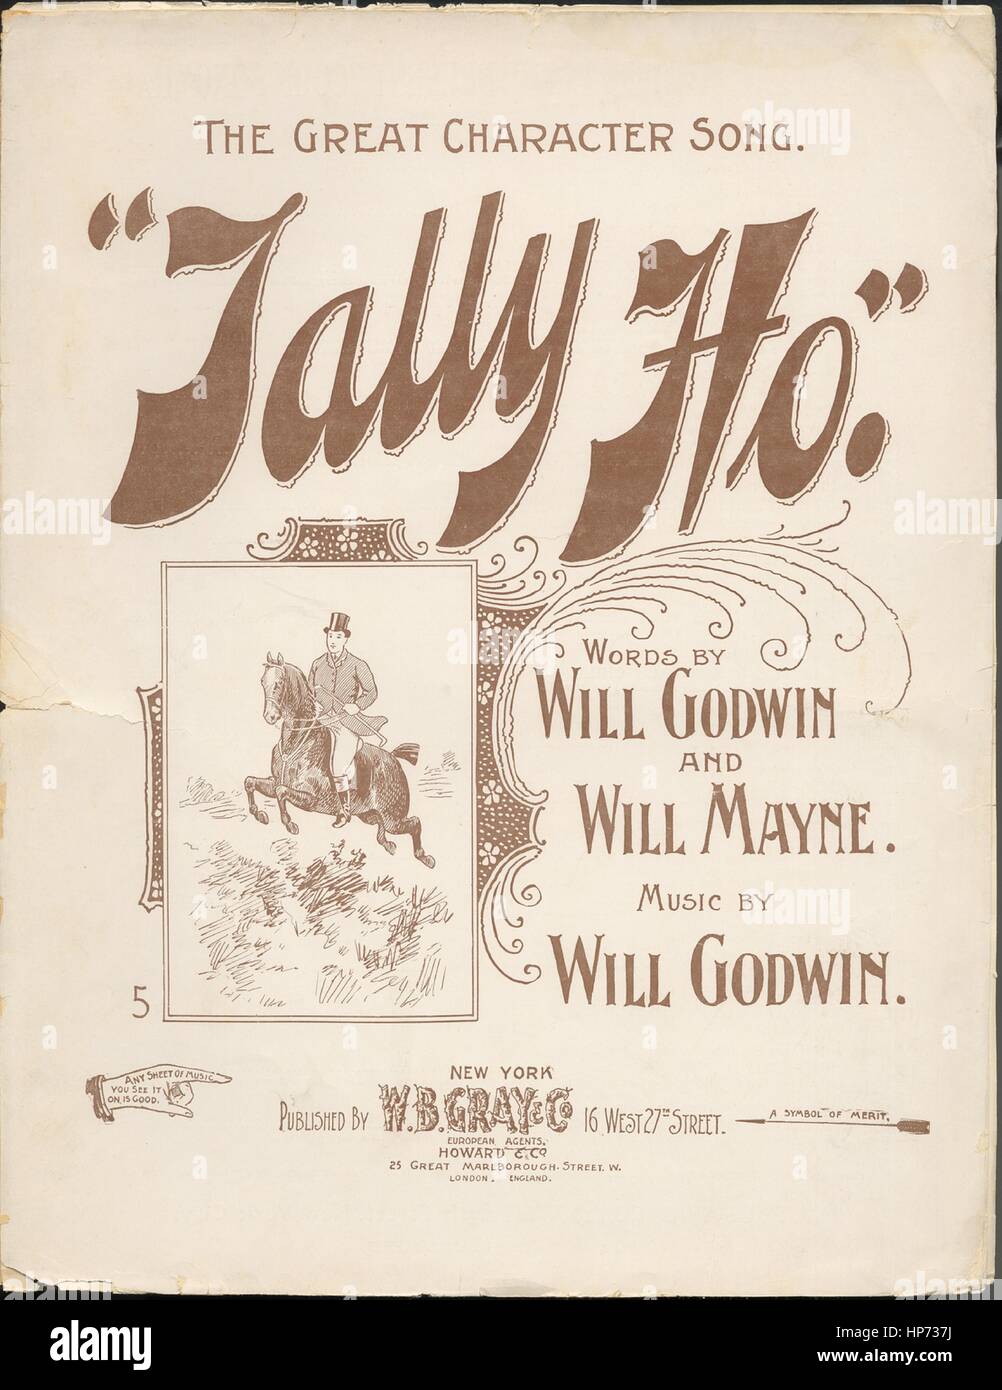 Sheet music cover image of the song ''Tally Ho' The Great Character Song', with original authorship notes reading 'Words by Will Godwin and Will Mayne Music by Will Godwin', United States, 1897. The publisher is listed as 'W.B. Gray and Co., 16 West 27th Street', the form of composition is 'strophic with chorus', the instrumentation is 'piano and voice', the first line reads 'When the summer is o'er and the brown leaves are falling', and the illustration artist is listed as 'None'. Stock Photo